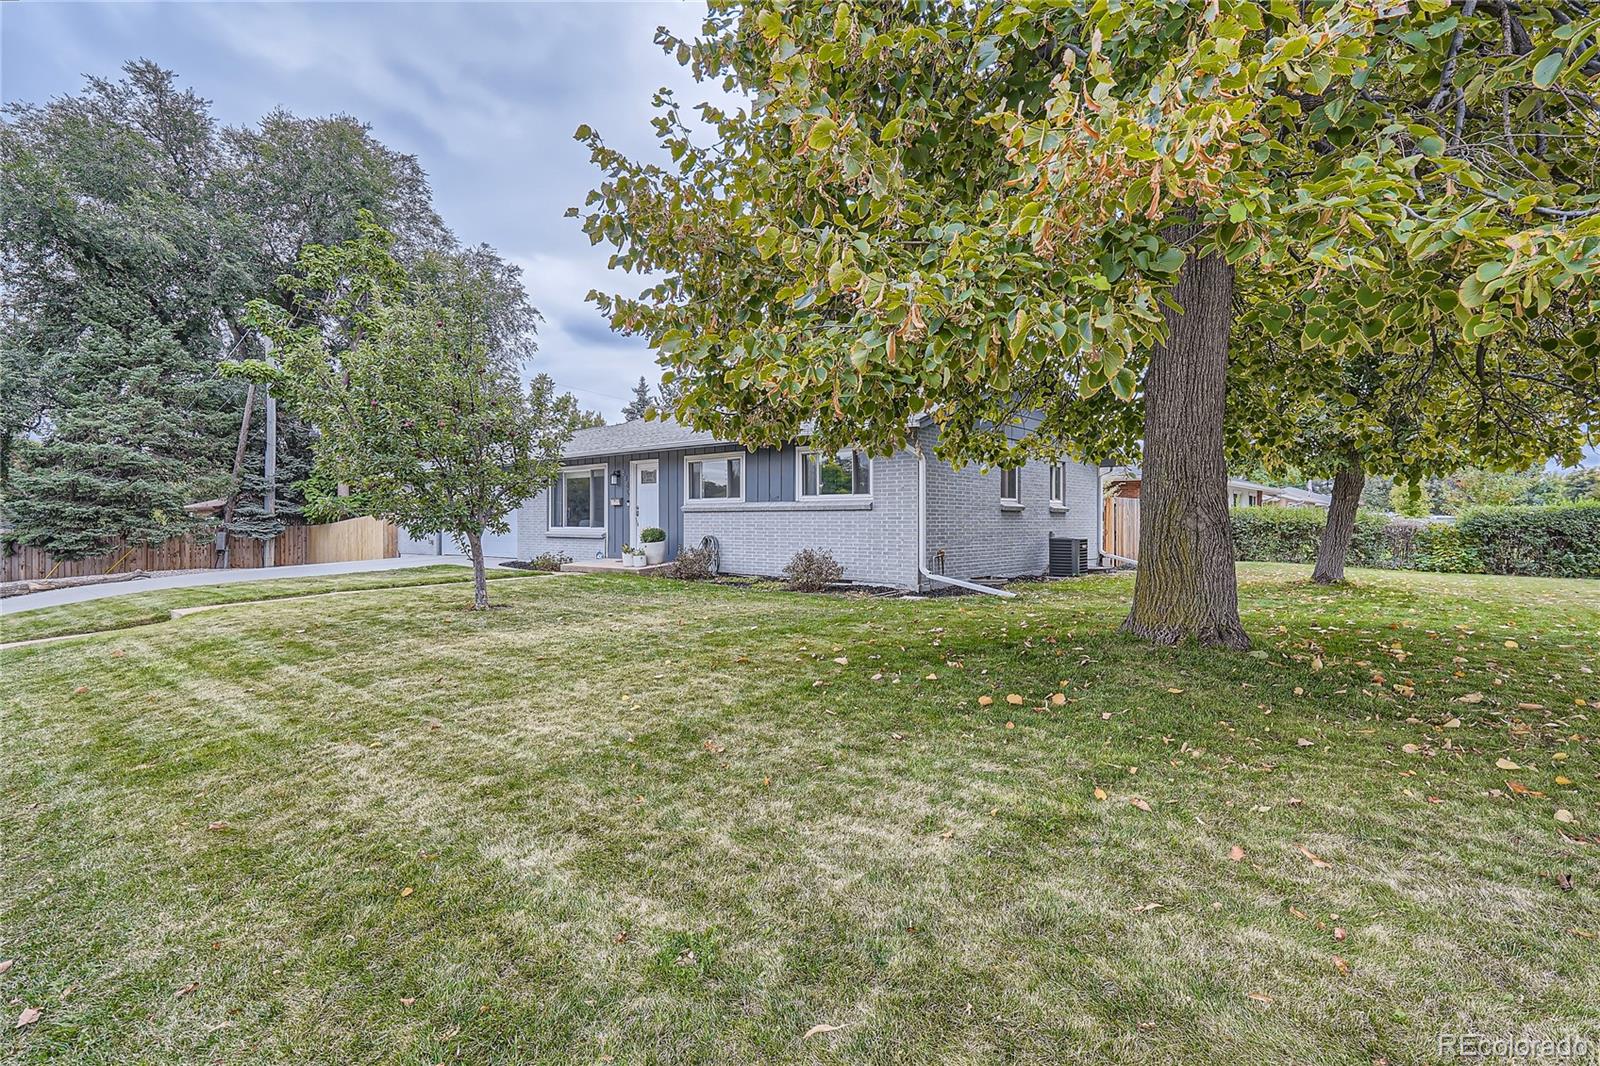 Report Image for 8480 W 1st Avenue,Lakewood, Colorado